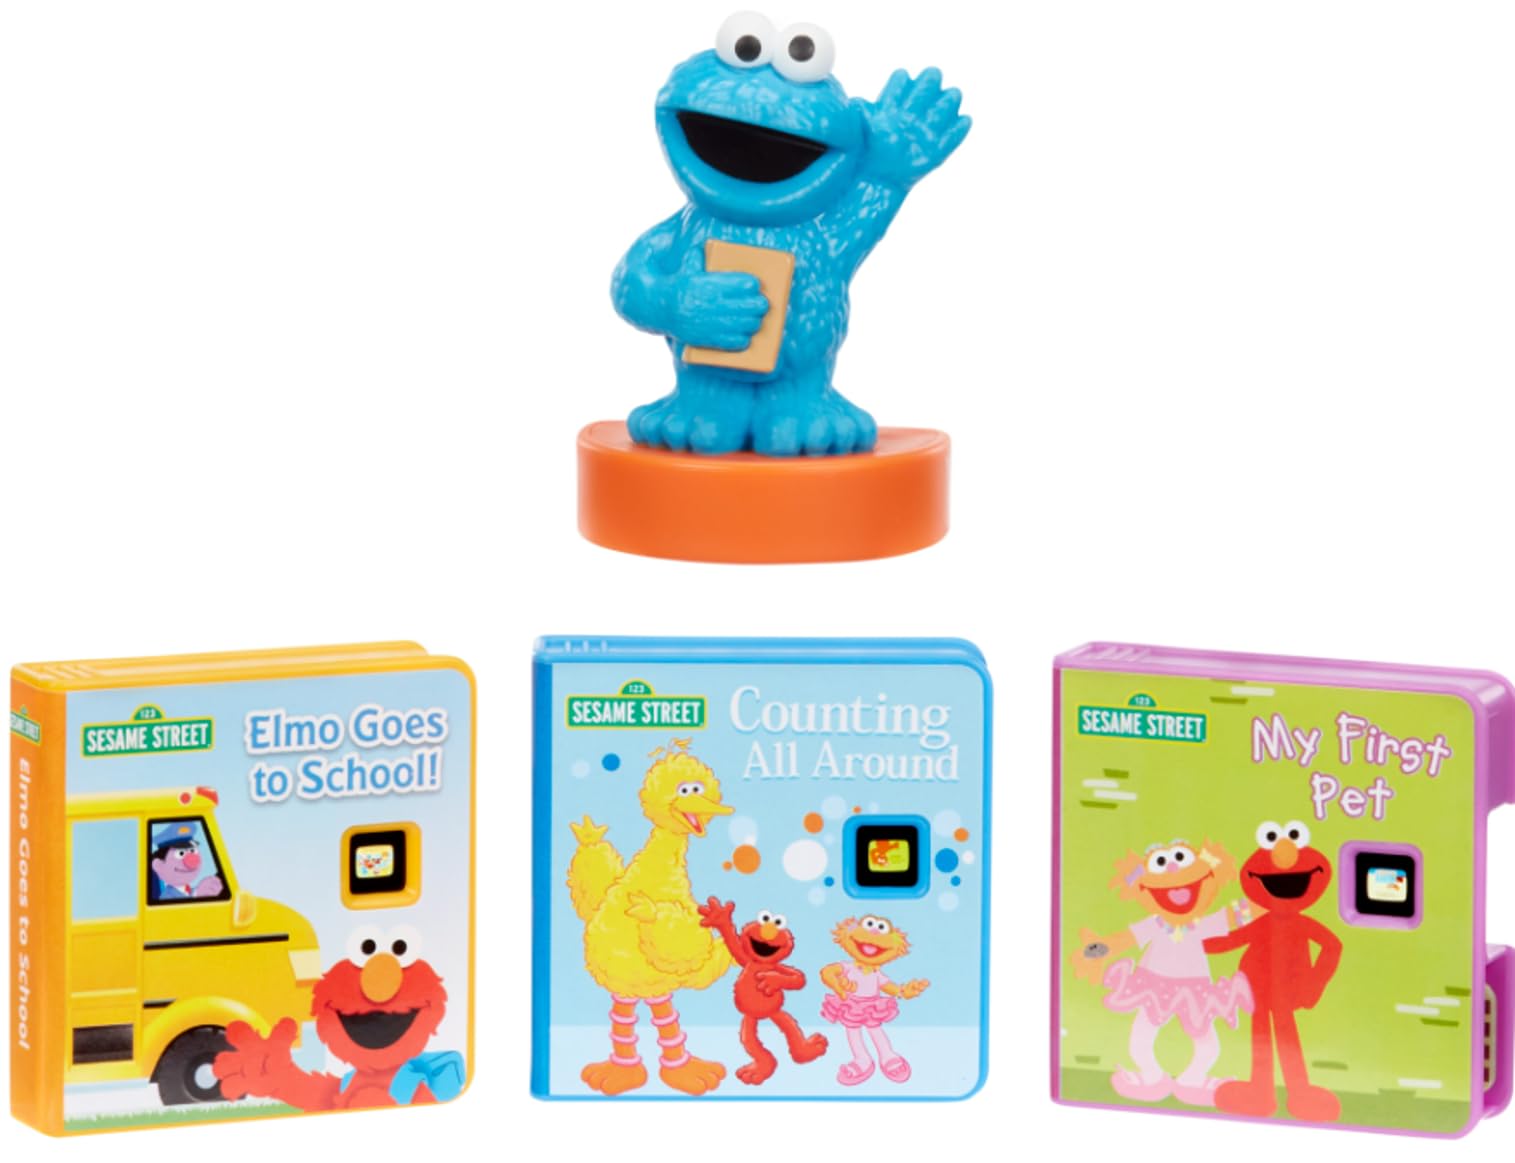 Little Tikes Story Dream Machine Sesame Street Cookie Monster & Friends Story Collection, Storytime, Books, Audio Play Character, Gift and Toy for Toddlers and Kids Girls Boys Ages 3+